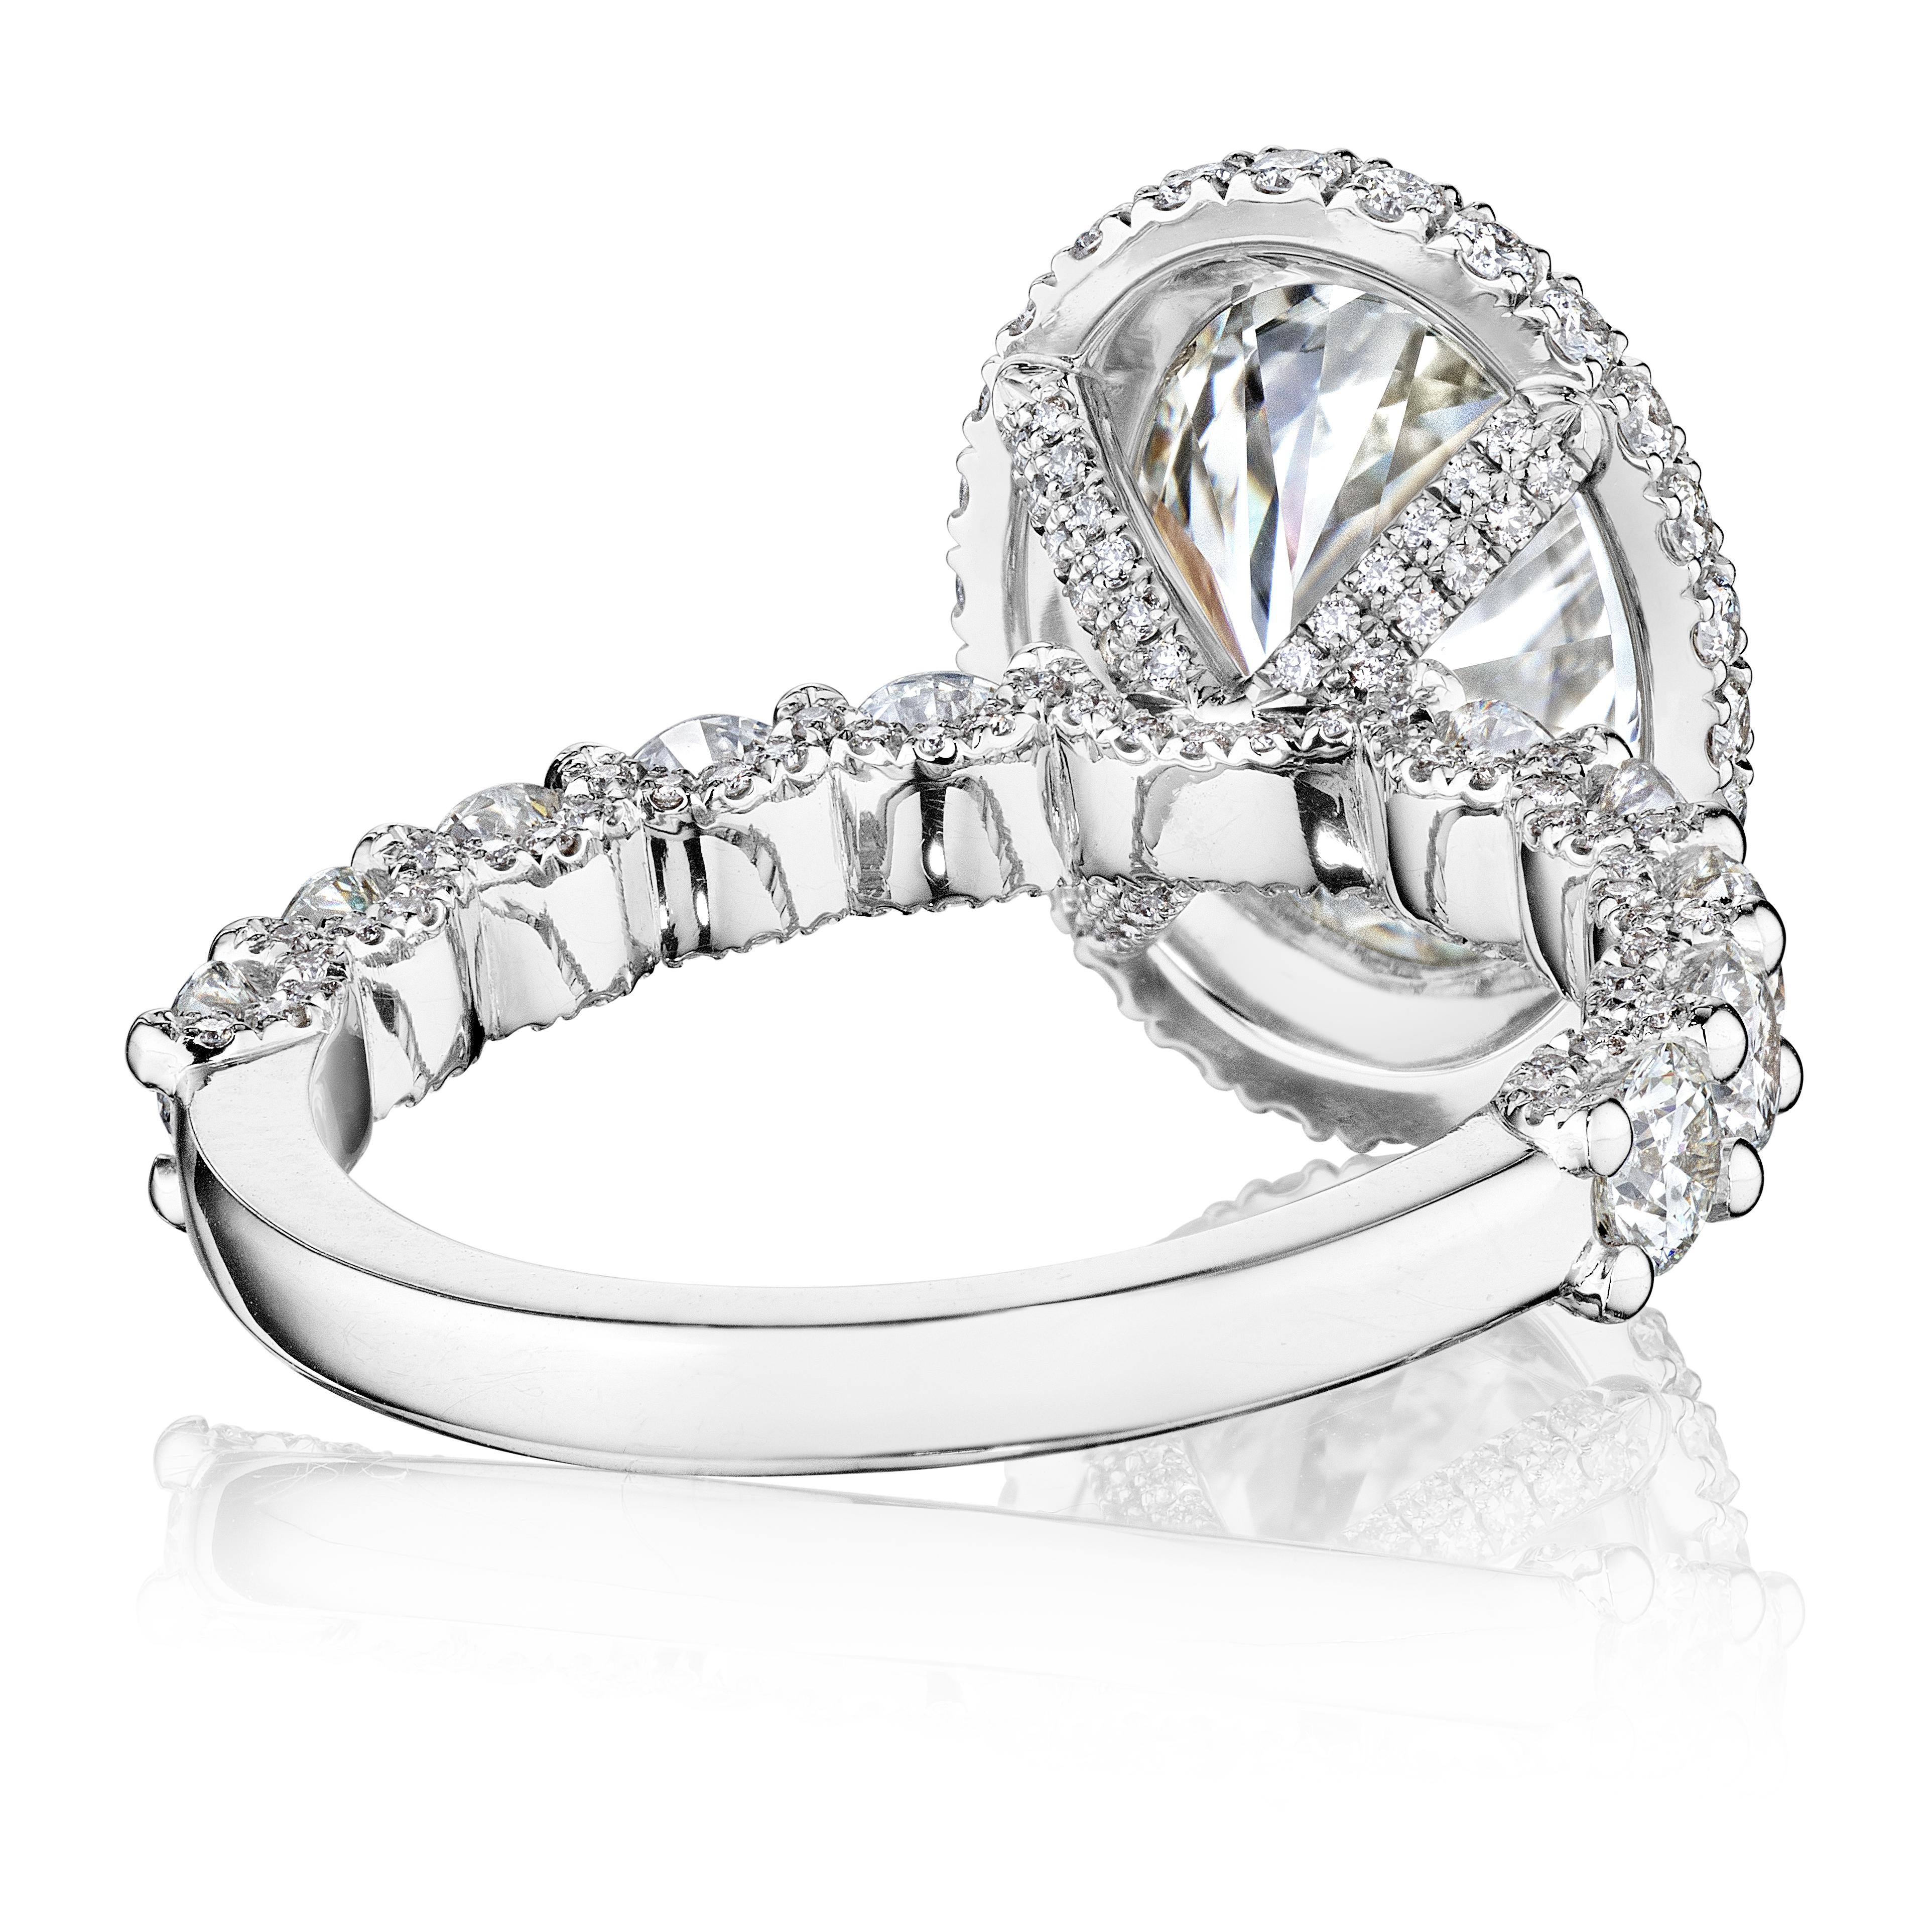 GIA Certified 5 Carat H VS1 Oval Diamond Engagement Ring 